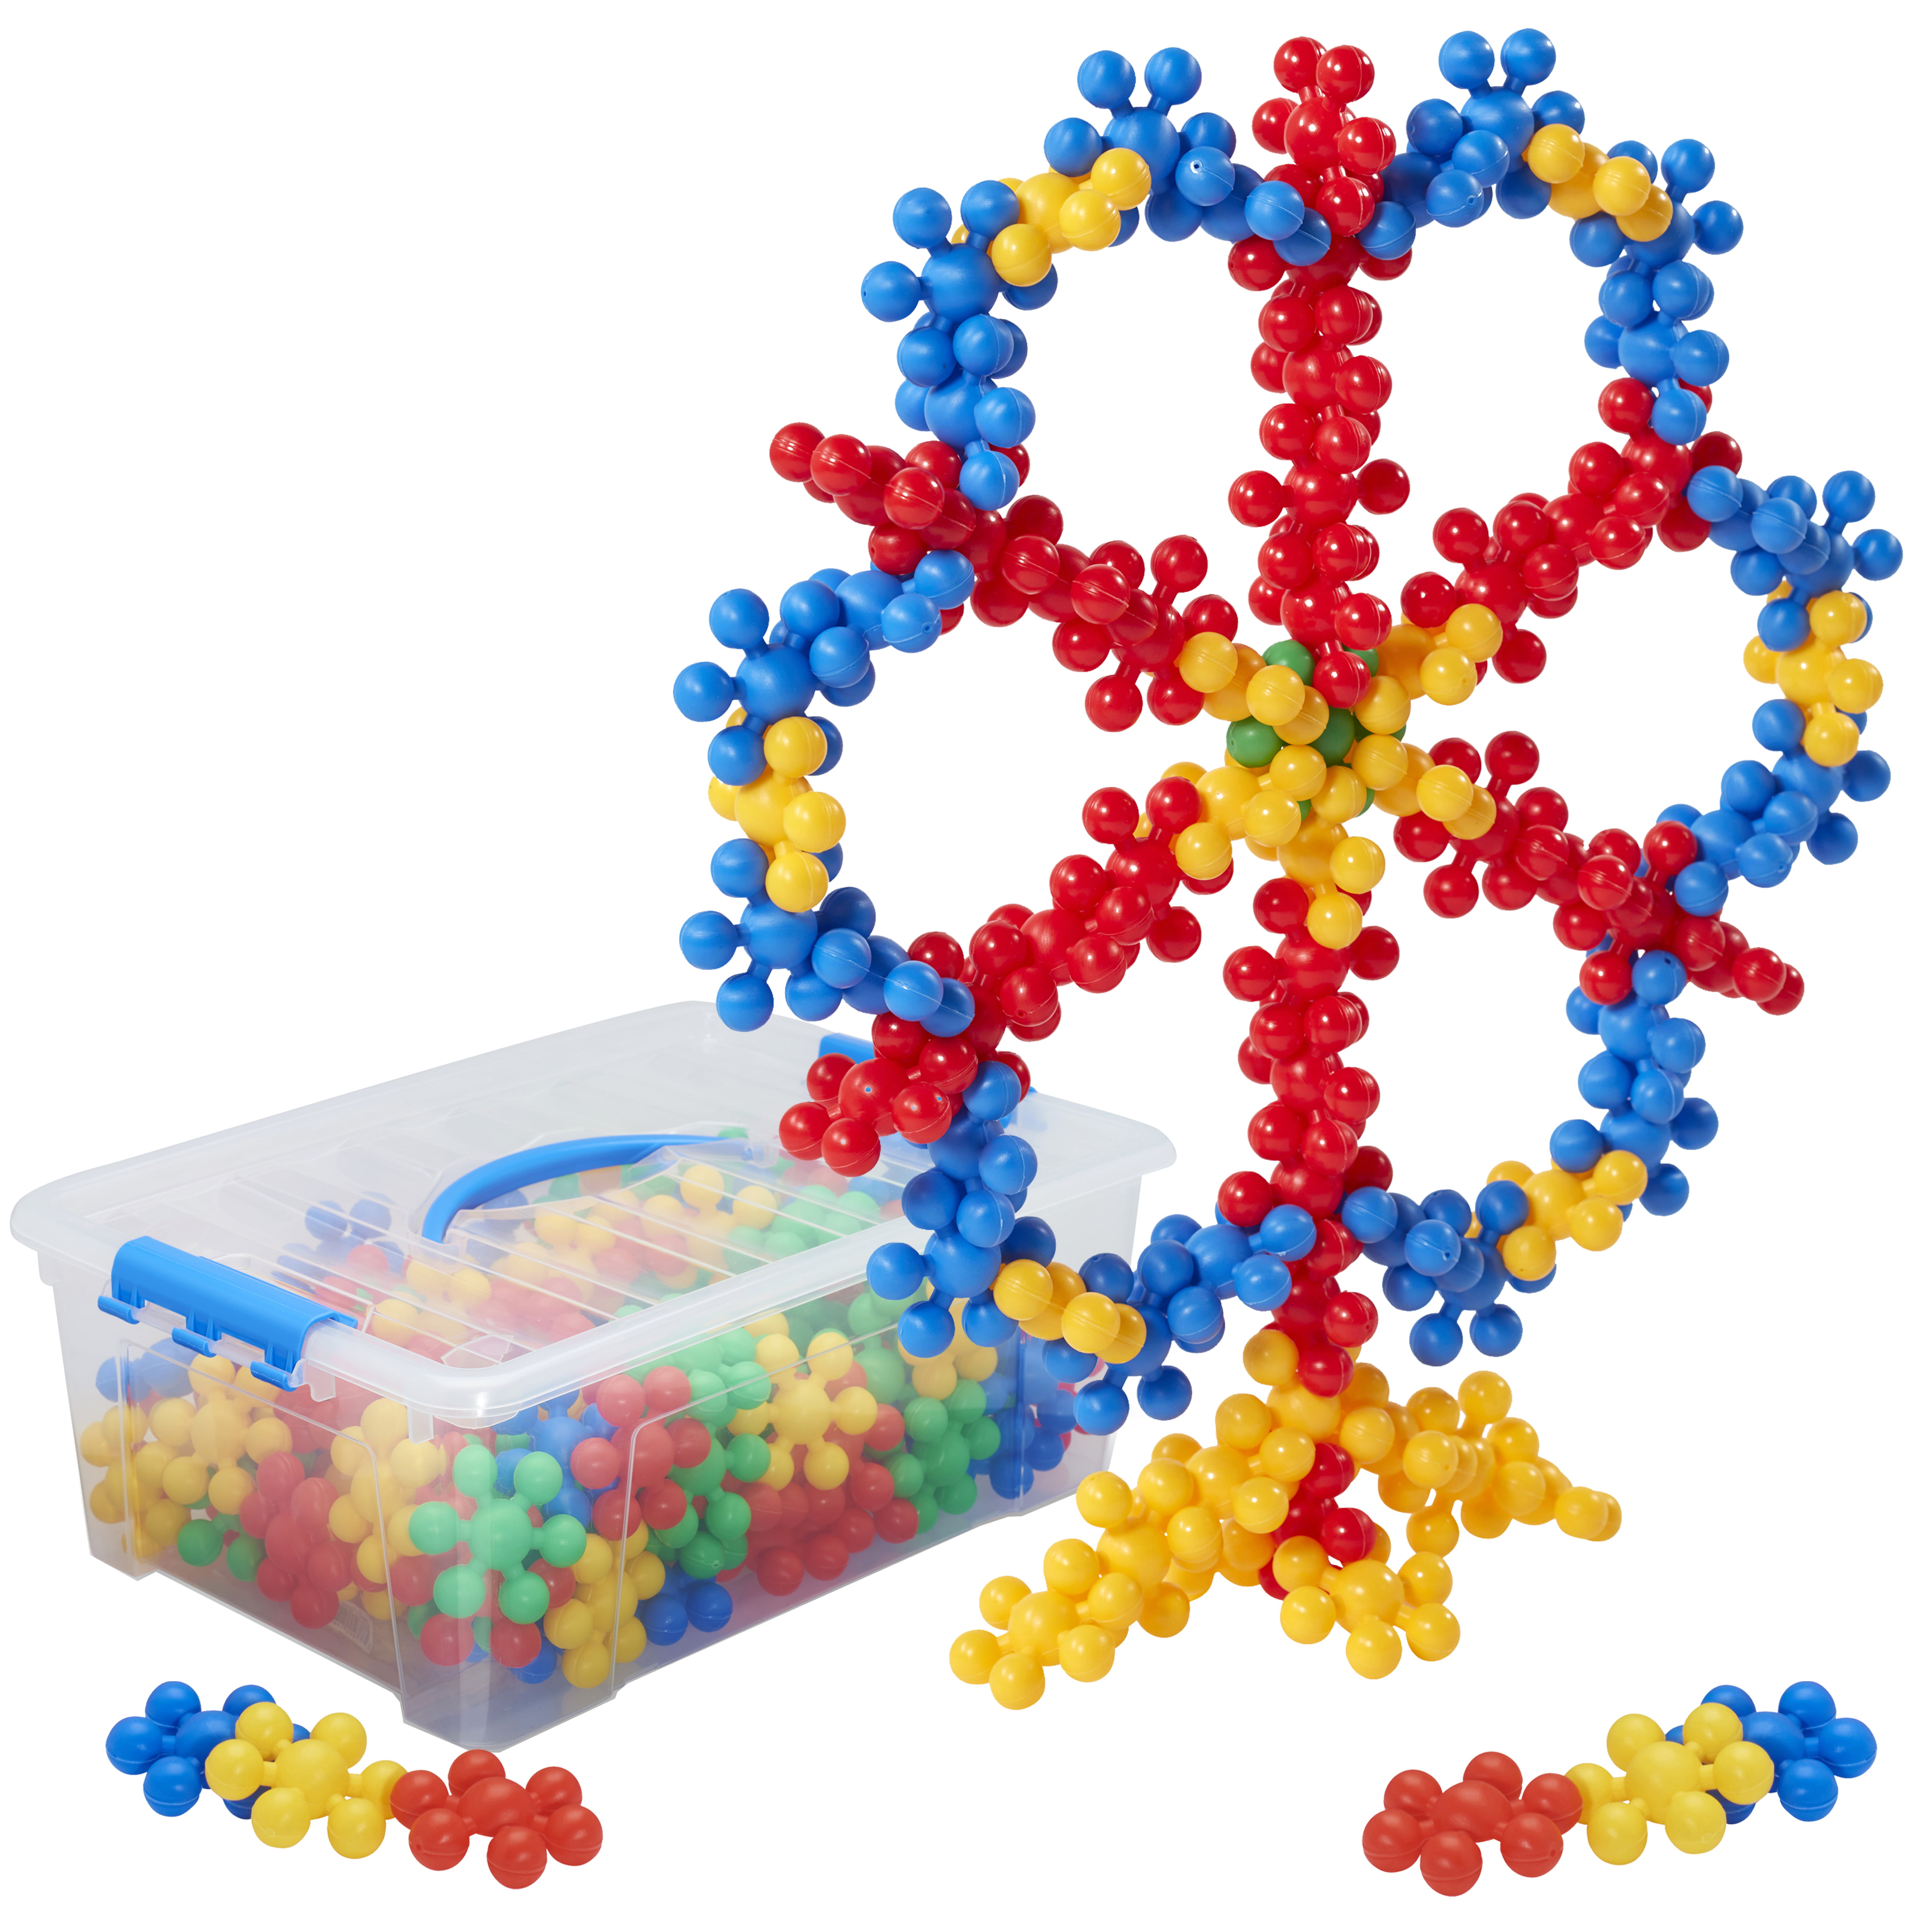 Ecr4kids Silly Star Connectors 112